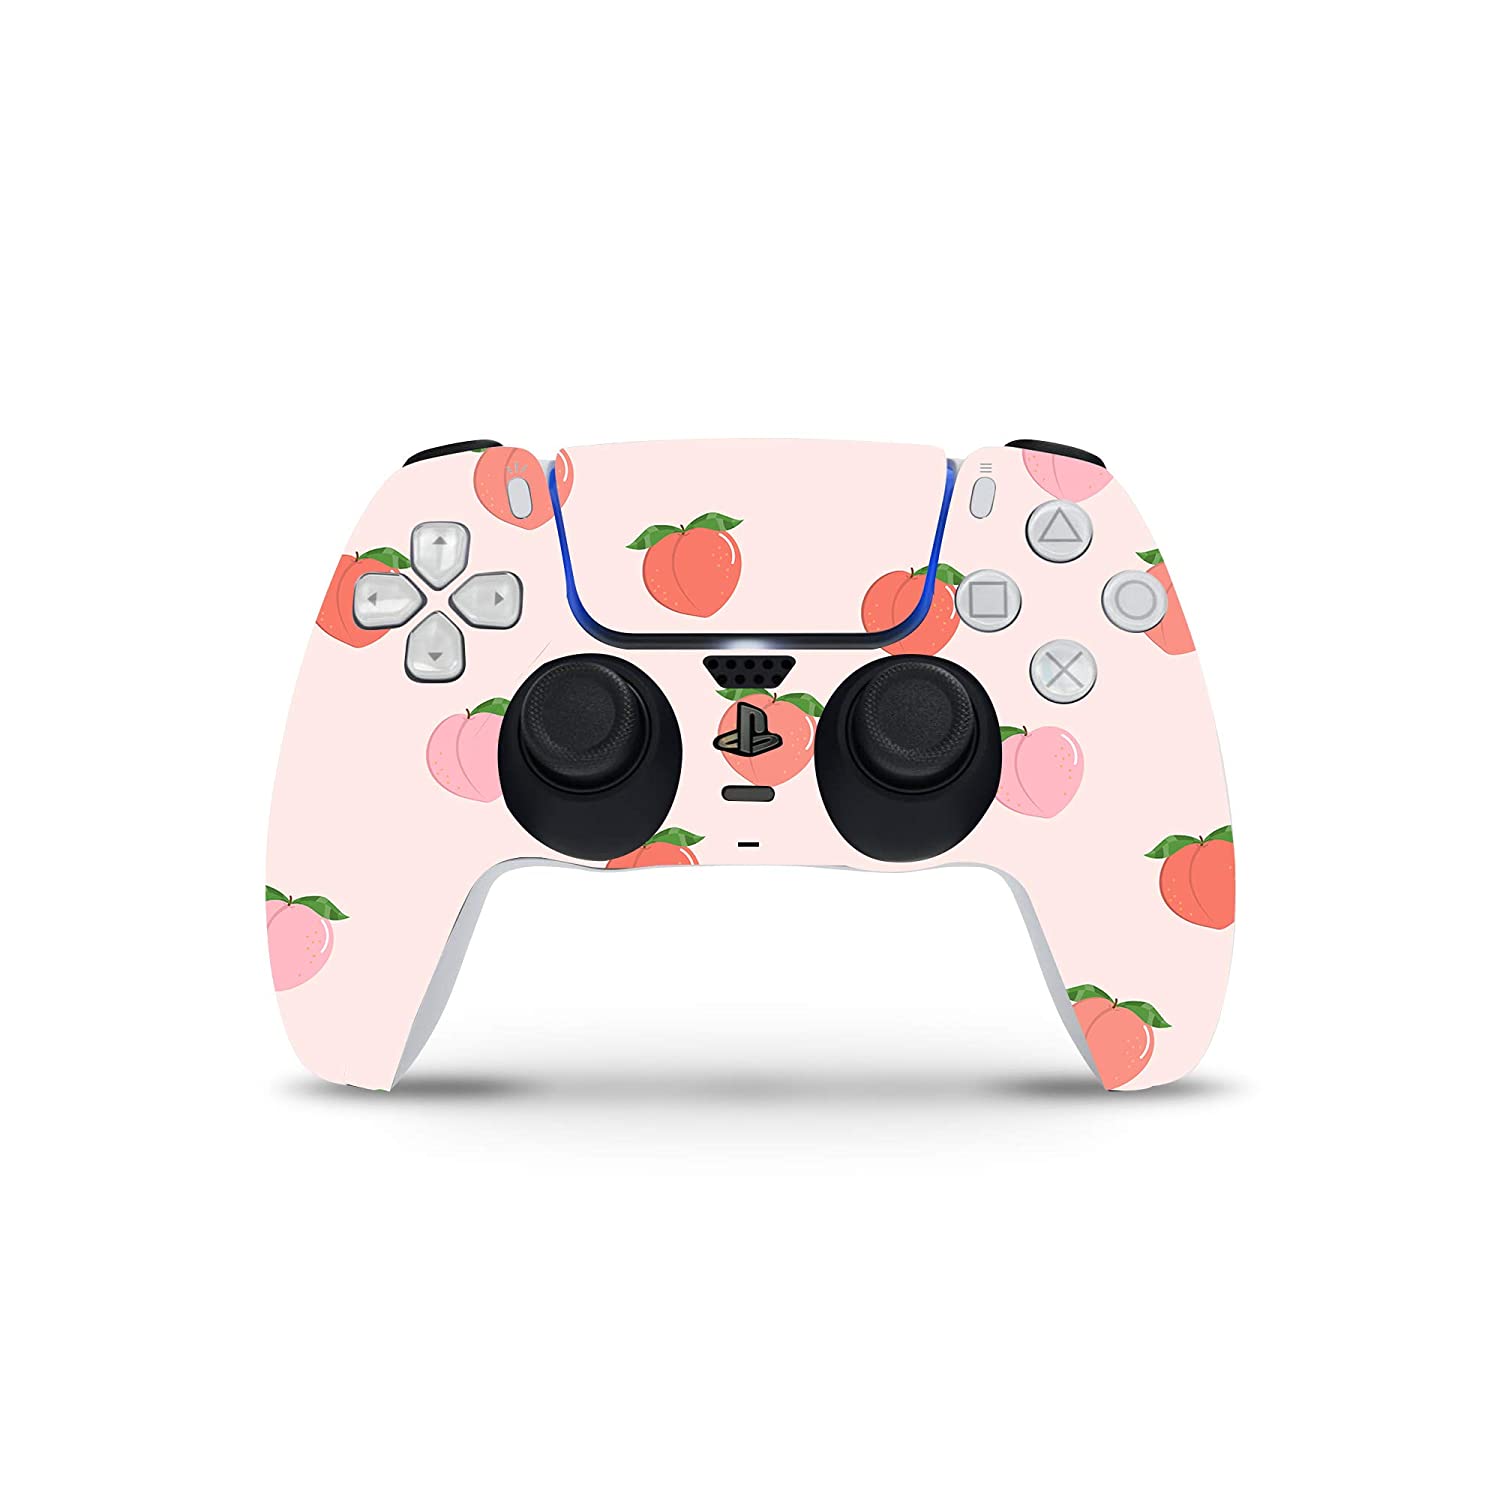 PS5 Controller Skin By ZOOMHITSKINS, Same Decal Quality For Cars, Peach Momo Pink Kawaii Anime Cute Fruit, High Quality, Durable, Bubble Free, Compatible With PS5 Controllers, Made In USA, Video Games